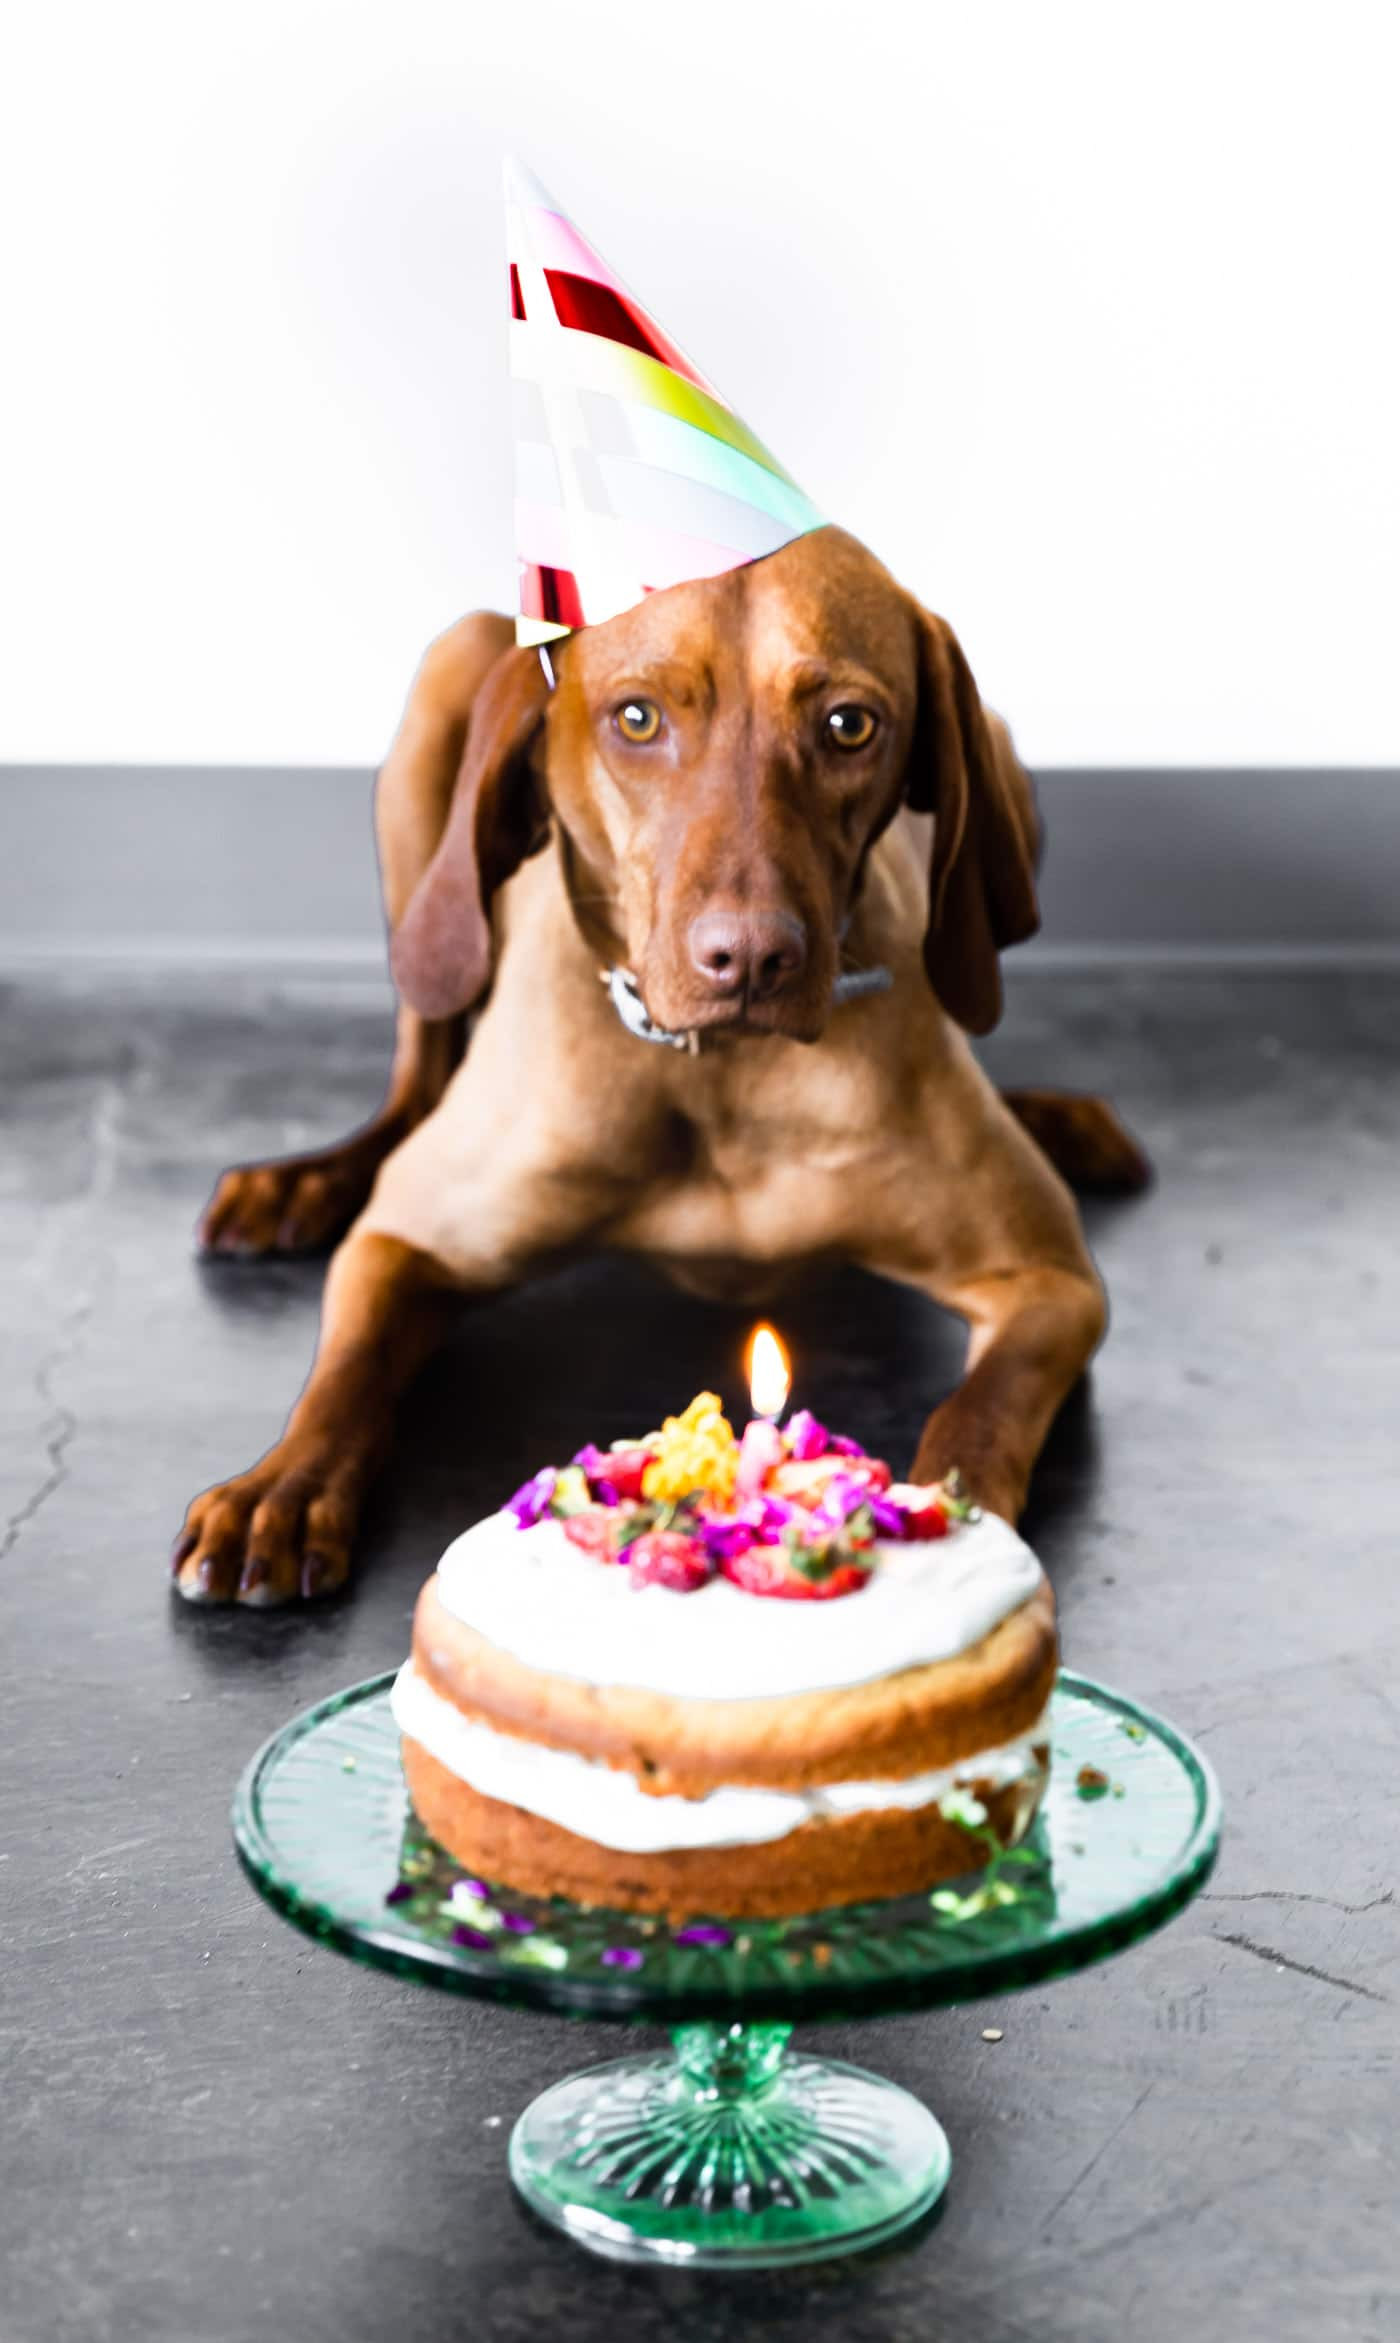 Birthday Cake Recipes For Dogs
 Birthday Cake for Dogs Grain Free Recipe